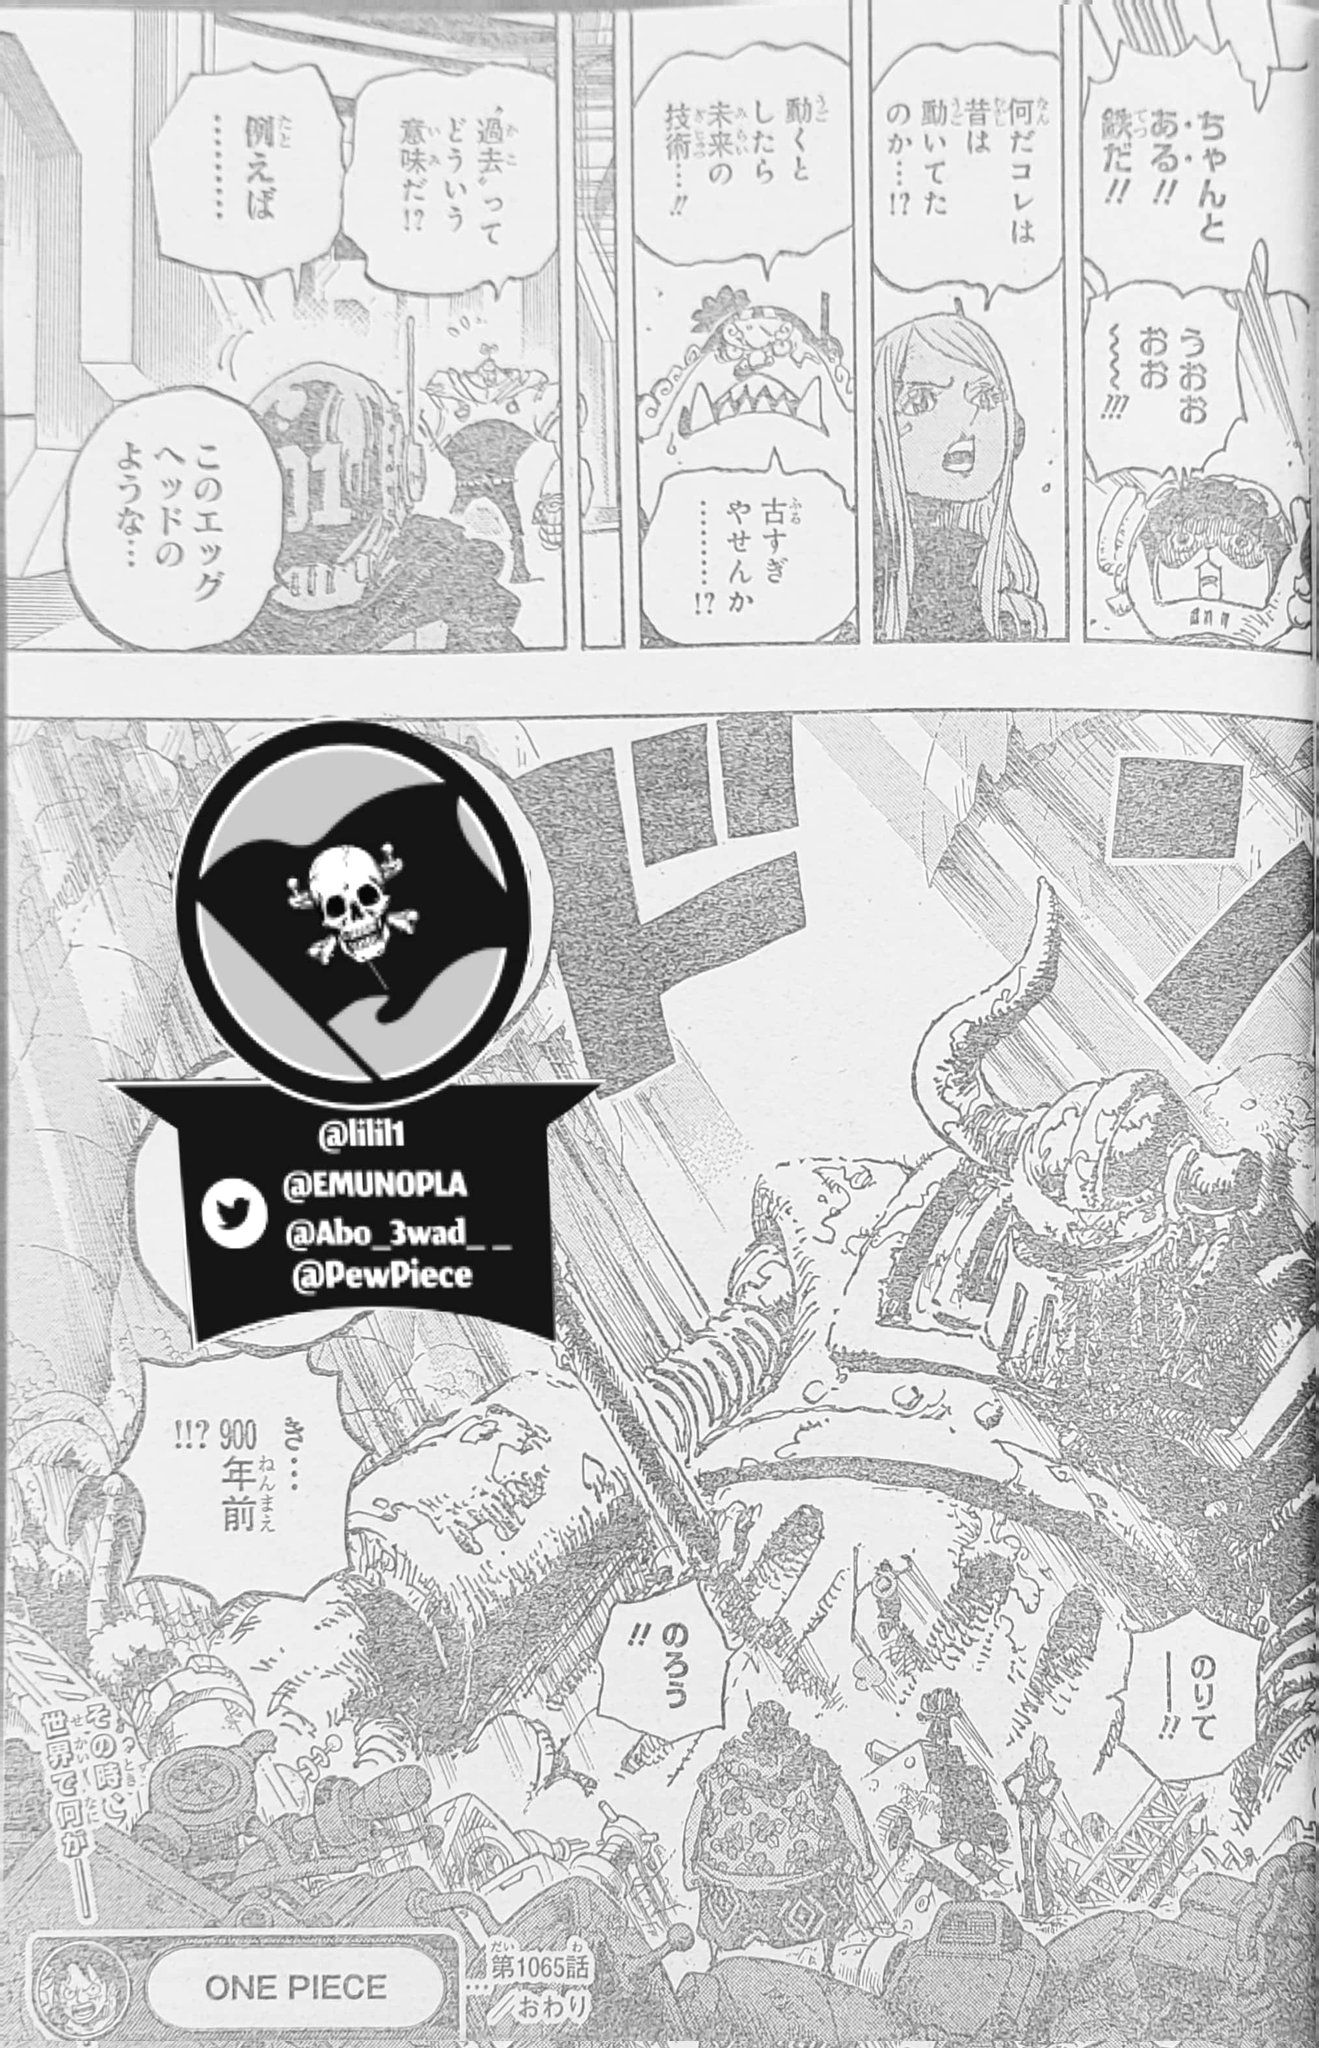 One Piece Manga Chapter 1065 Full Plot Summary Leaks And Spoilers Raw Scans High On Cinema